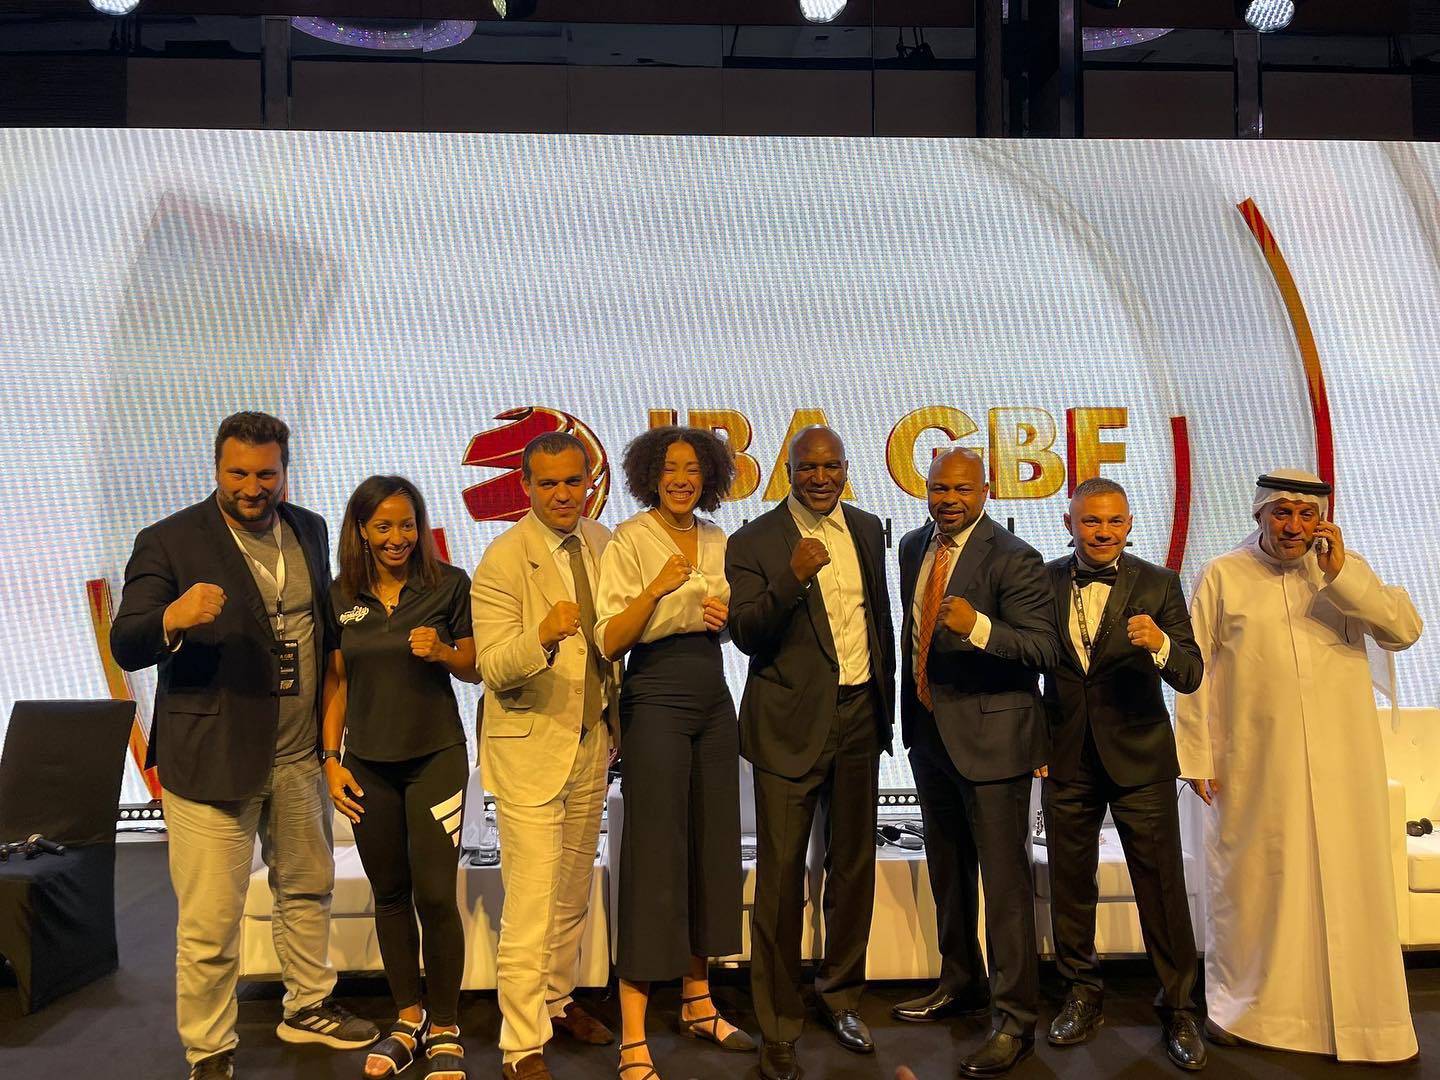 Roby Cammarelle tra i Testimonial del Global Boxing Forum 2022